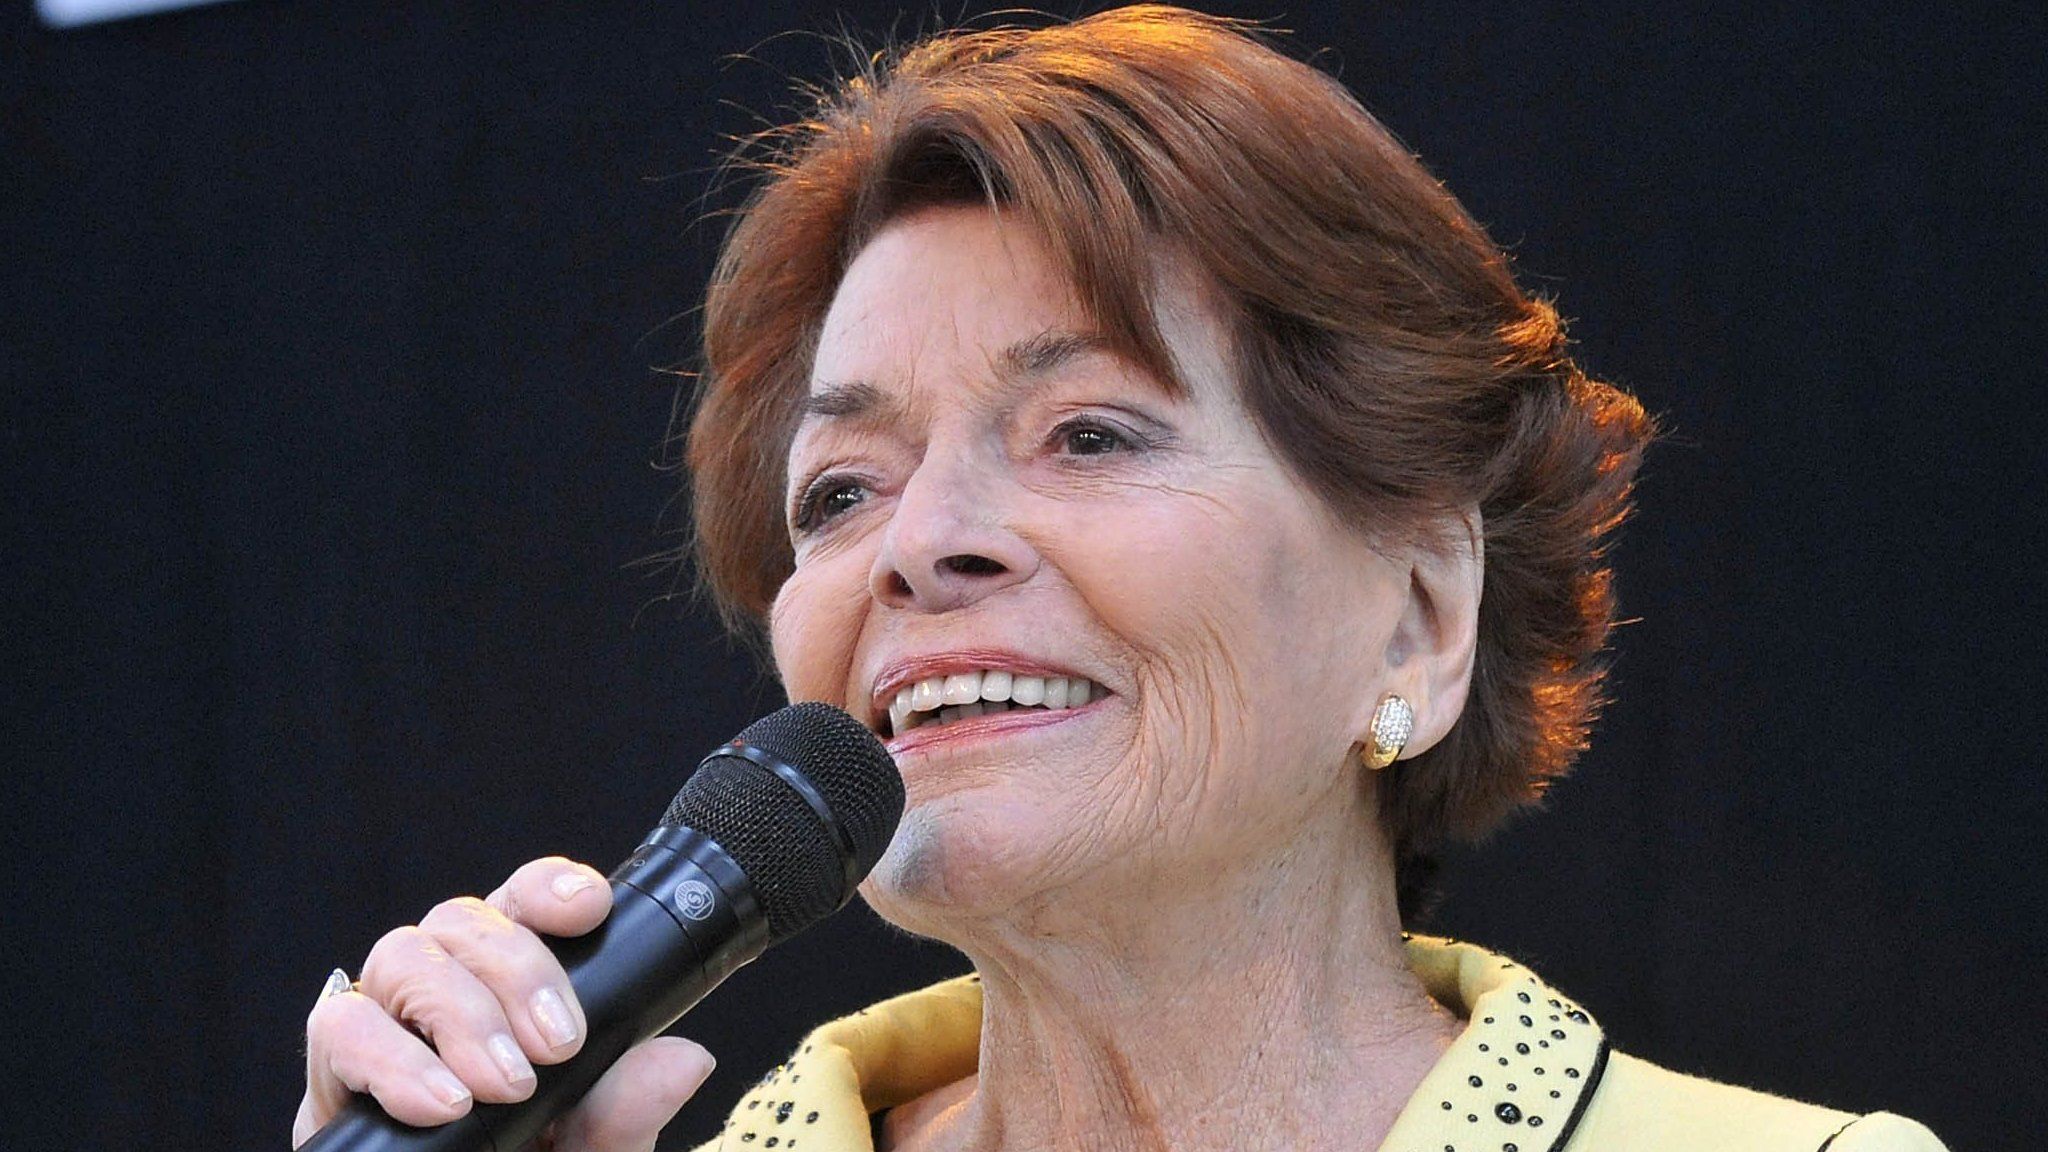 Swiss singer Lys Assia performs on stage at Duesseldorf airport, Germany, 1 May 2011